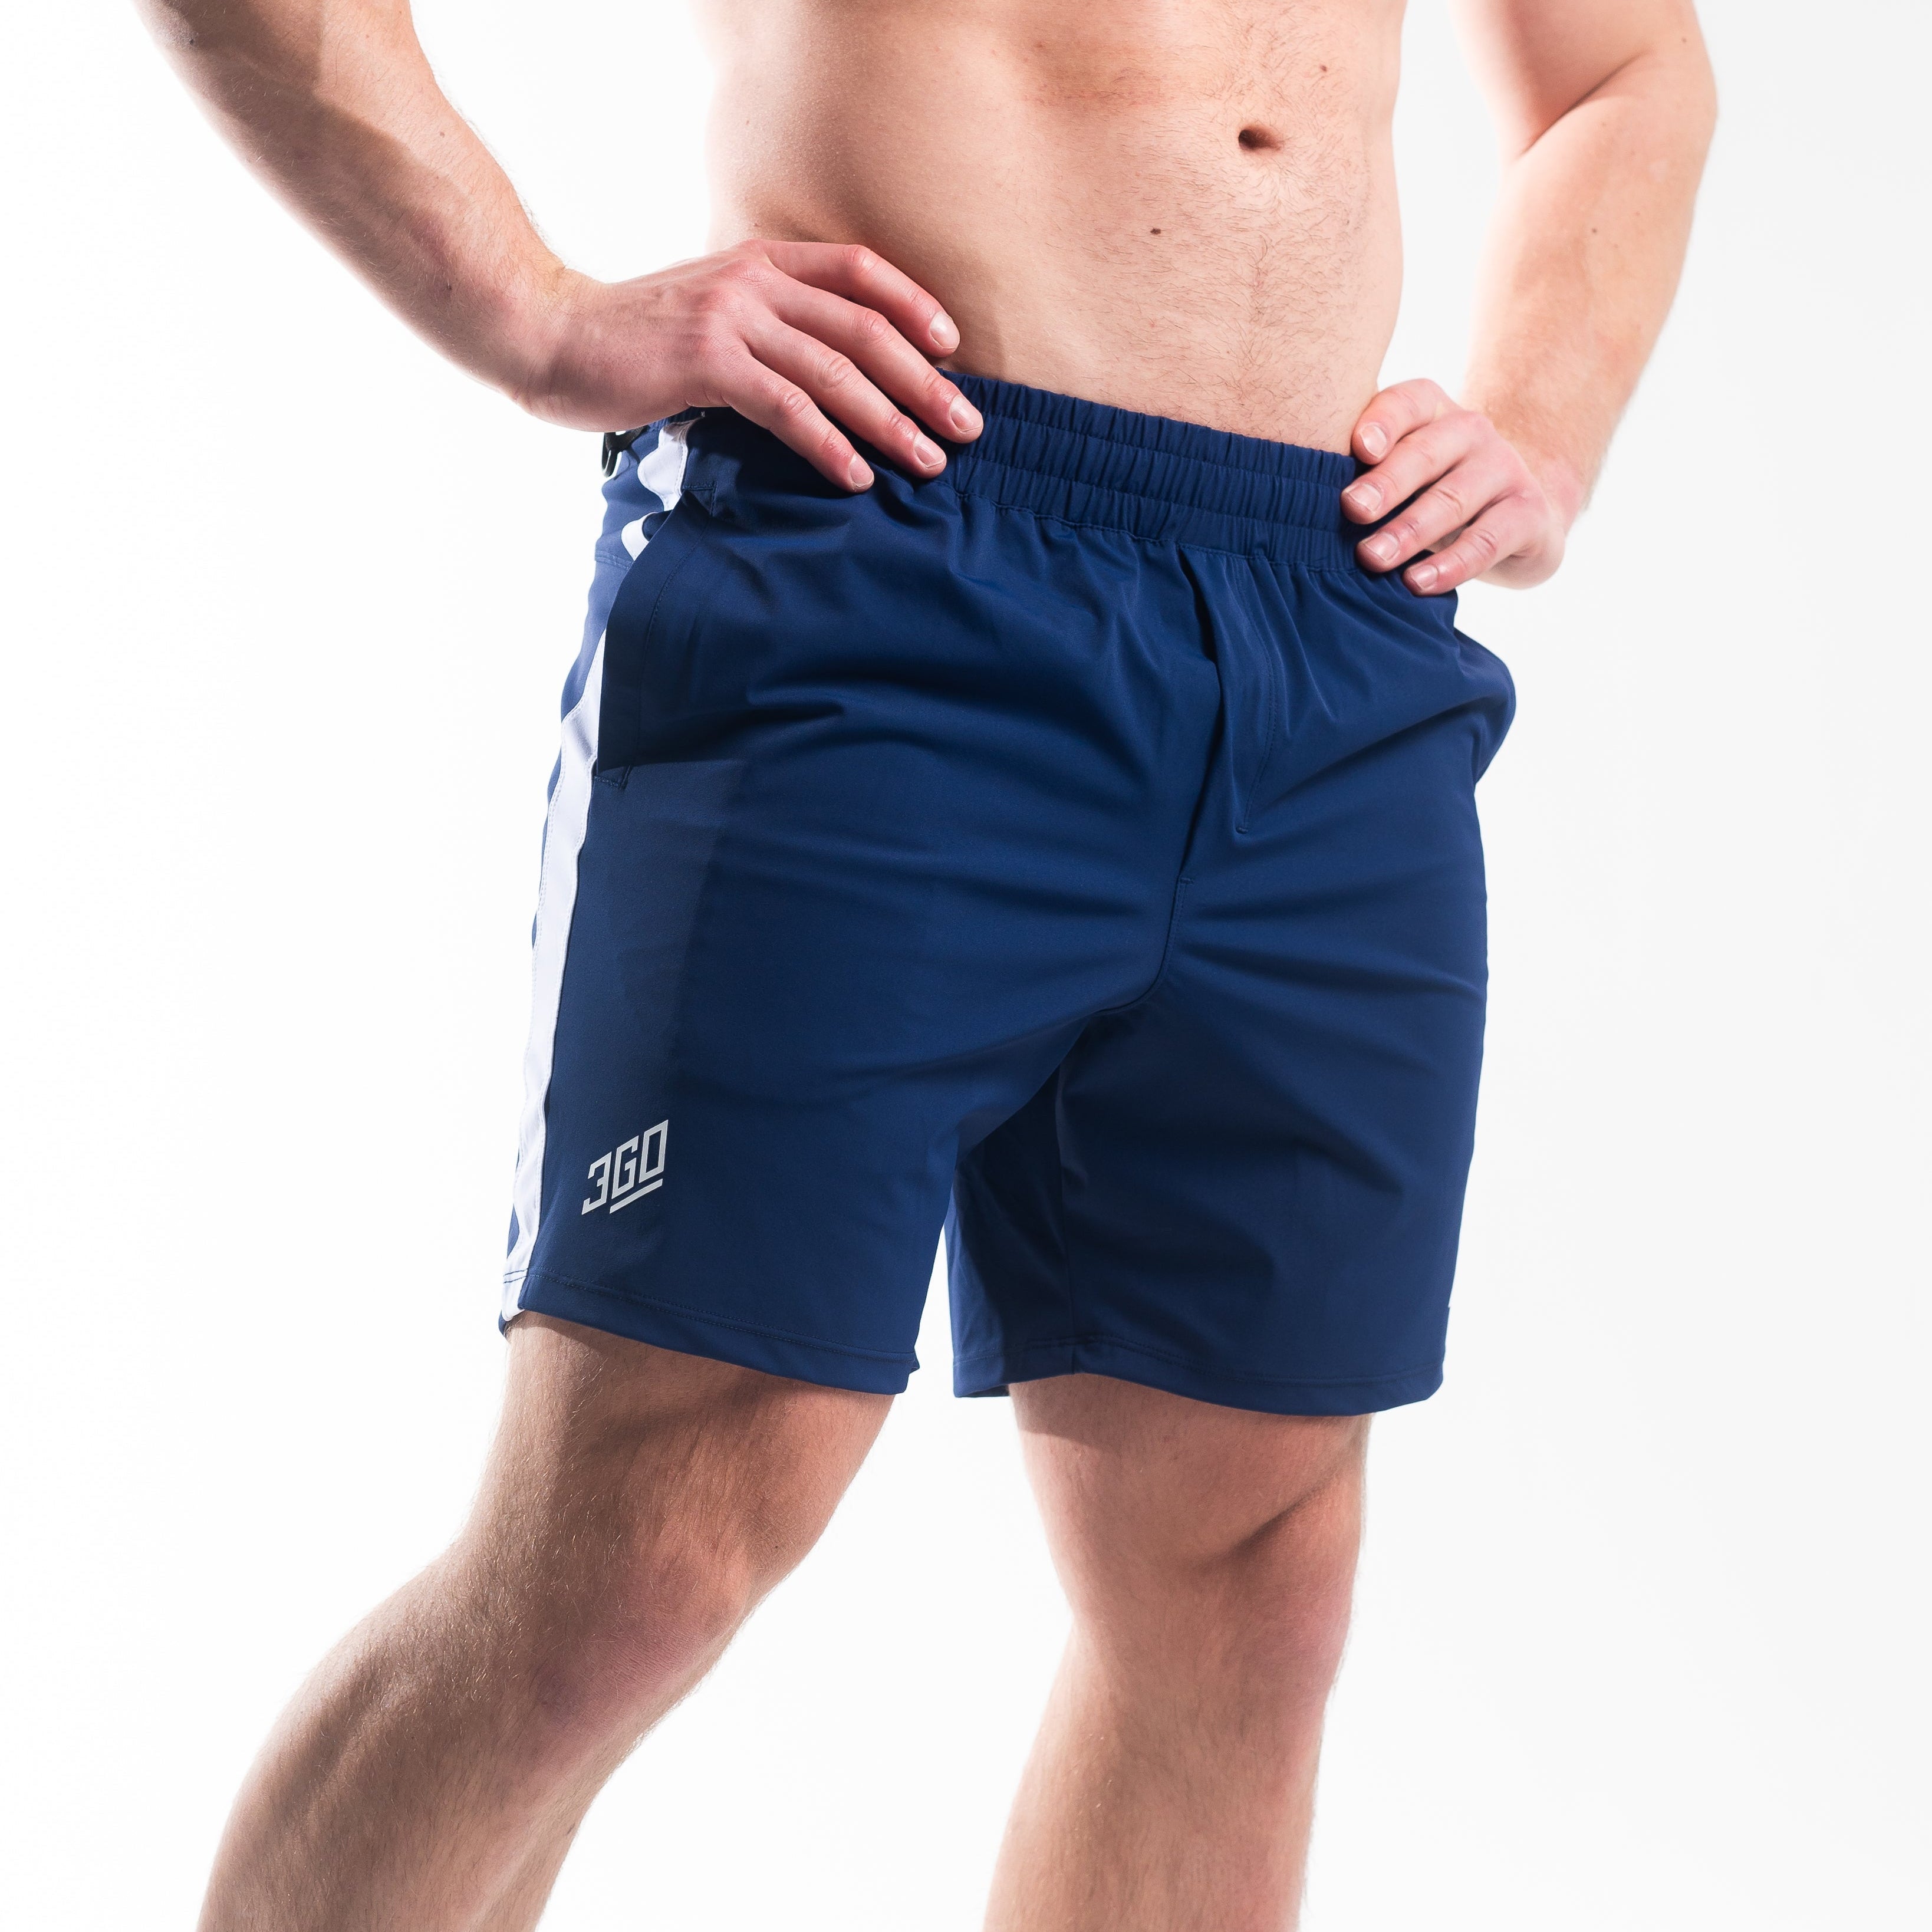 360GO was created to provide the flexibility for all movements in your training while offering comfort. These shorts offer 360 degrees of stretch in all angles and allow you to remain comfortable without limiting any movement in both training and life environments. Designed with a wide drawstring to easily adjust your waist without slipping. Purchase 360GO KWD shorts from A7 Europe. Genouillères powerlifting shipping to France, Spain, Ireland, Germany, Italy, Sweden and EU.